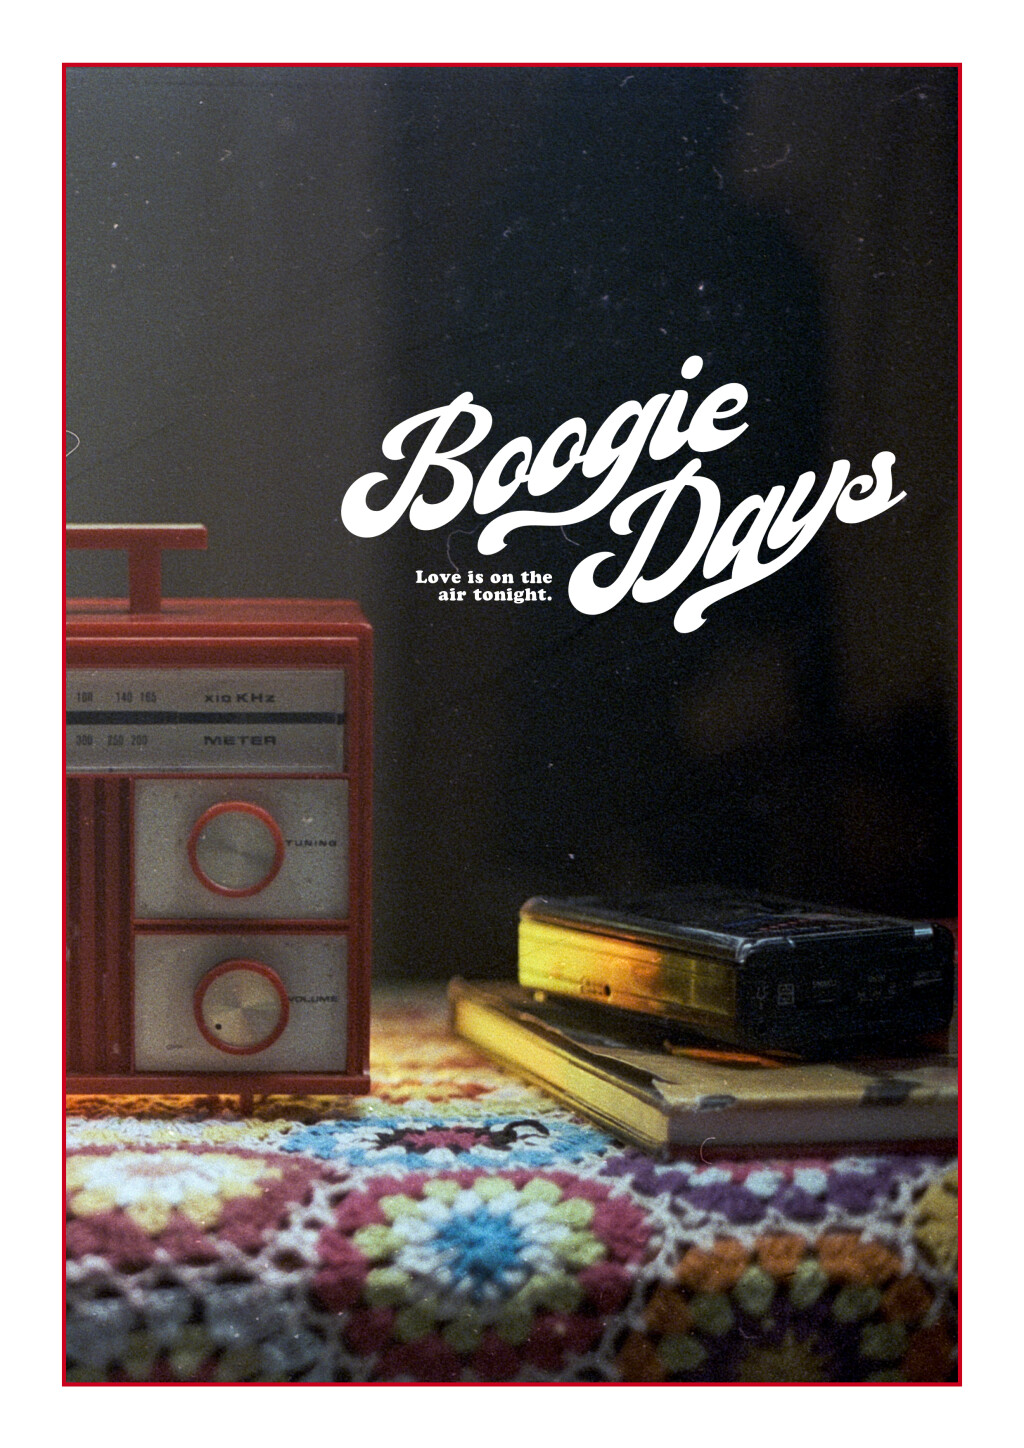 Filmposter for Boogie Days